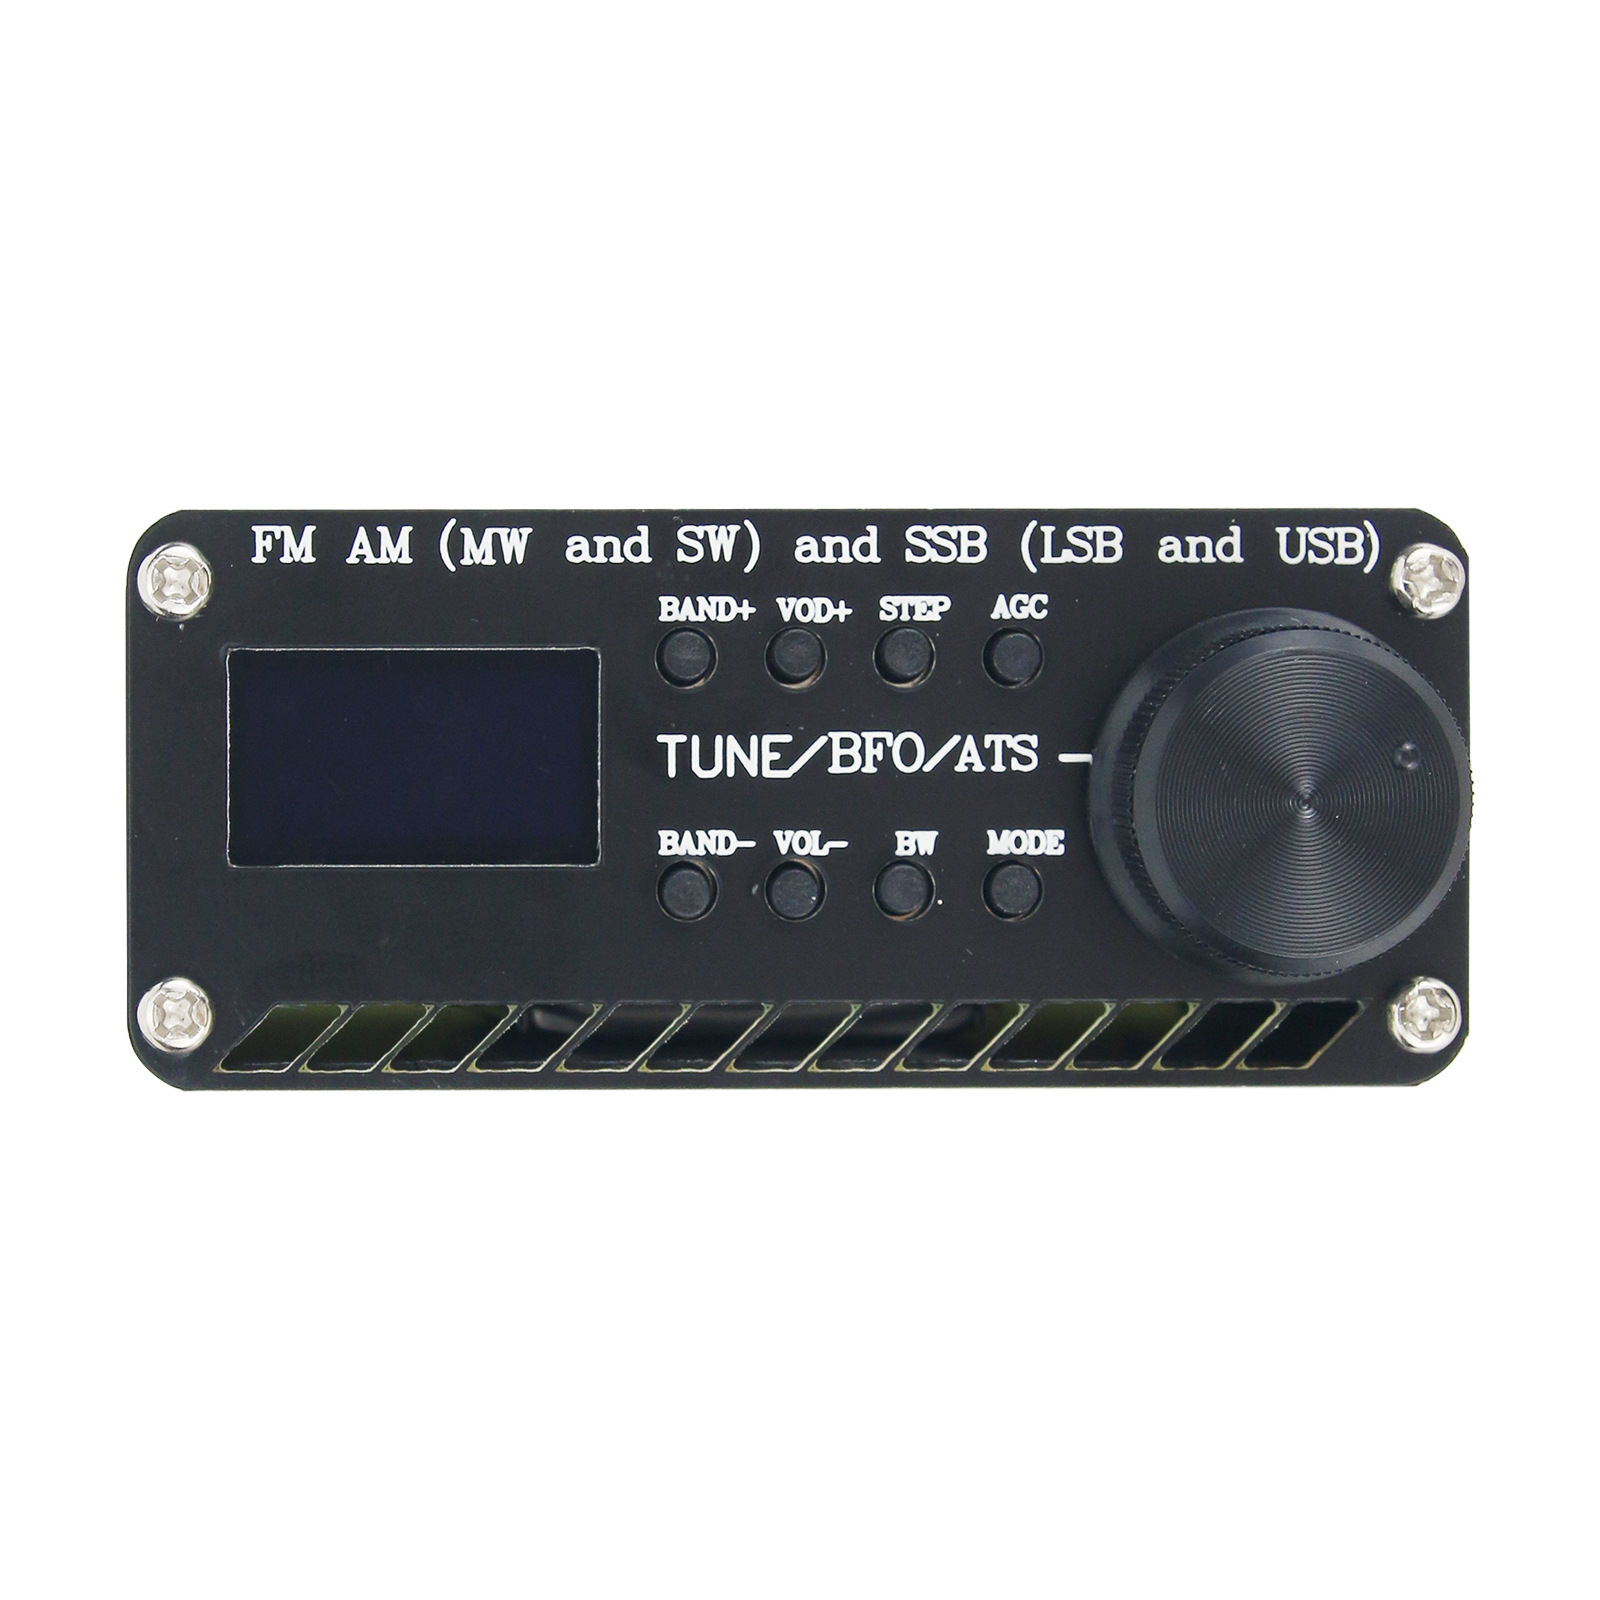 SI4732-All-Band-Radio-FM-AM-MW-And-SW-And-SSB-LSB-And-USB-With-Antenna-Lithium-Battery-Speaker-1816774-2